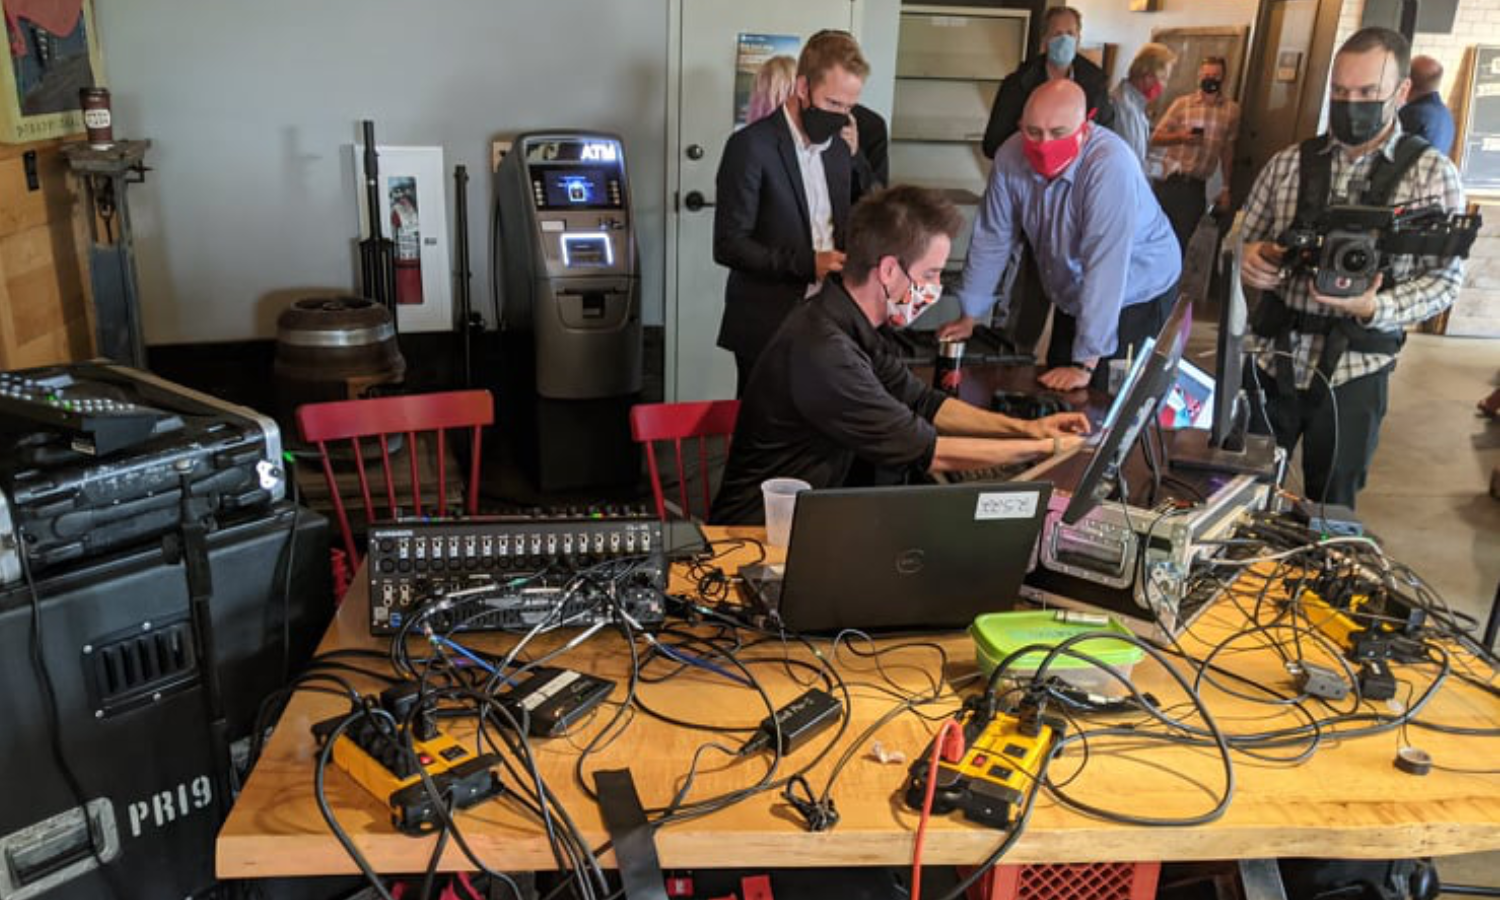 Michael and a client working at FOH for a political event in Fredericton NB. They are surrounded by livestream and audio equipment.